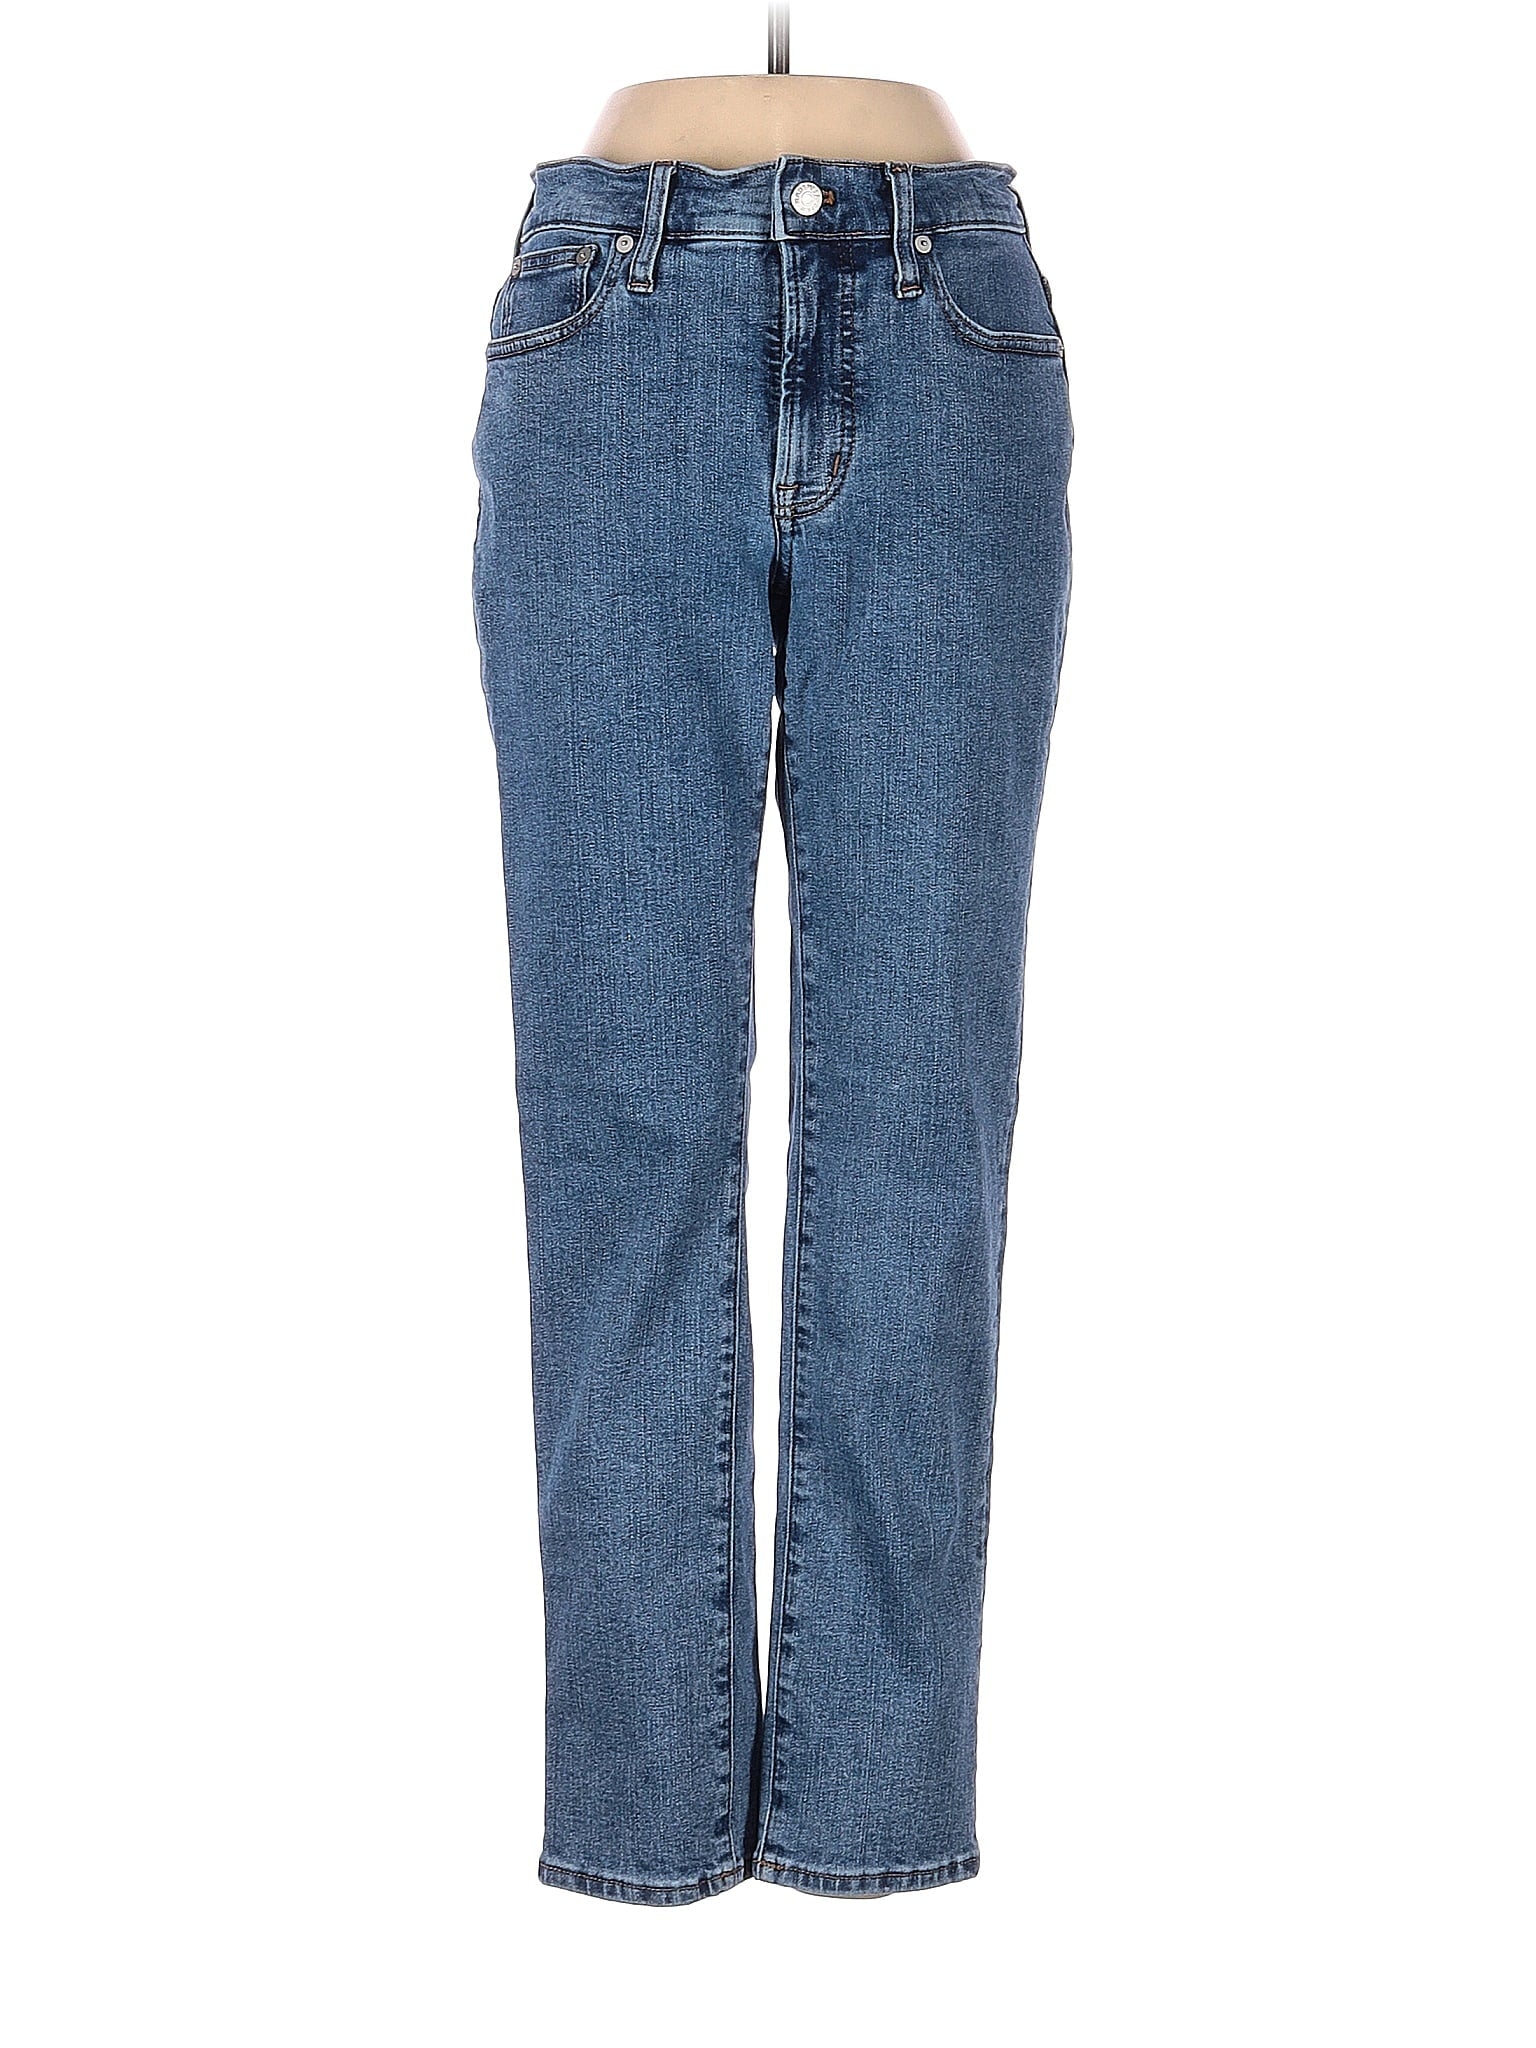 High-Rise The Mid-Rise Perfect Vintage Jean In Knowland Wash waist size - 24